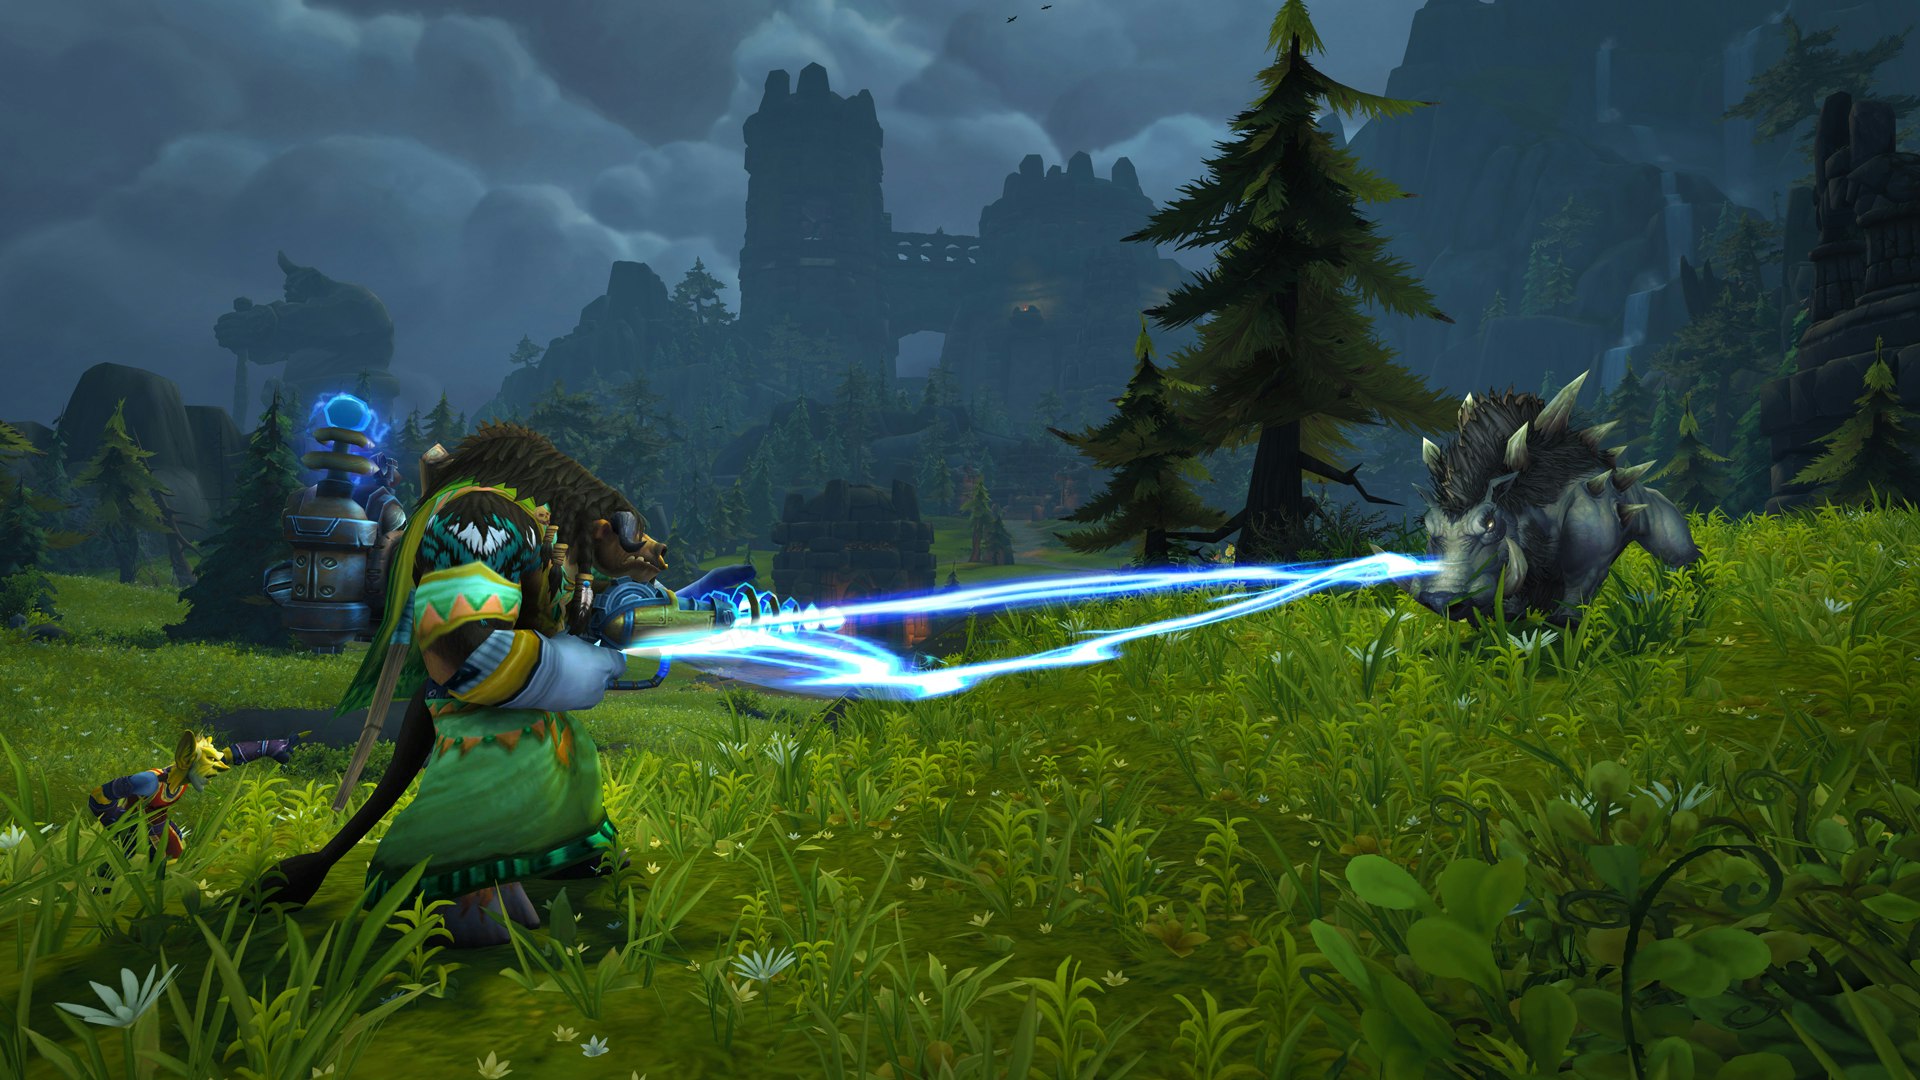 A character in the World of Warcraft game fights a boar in the countryside.